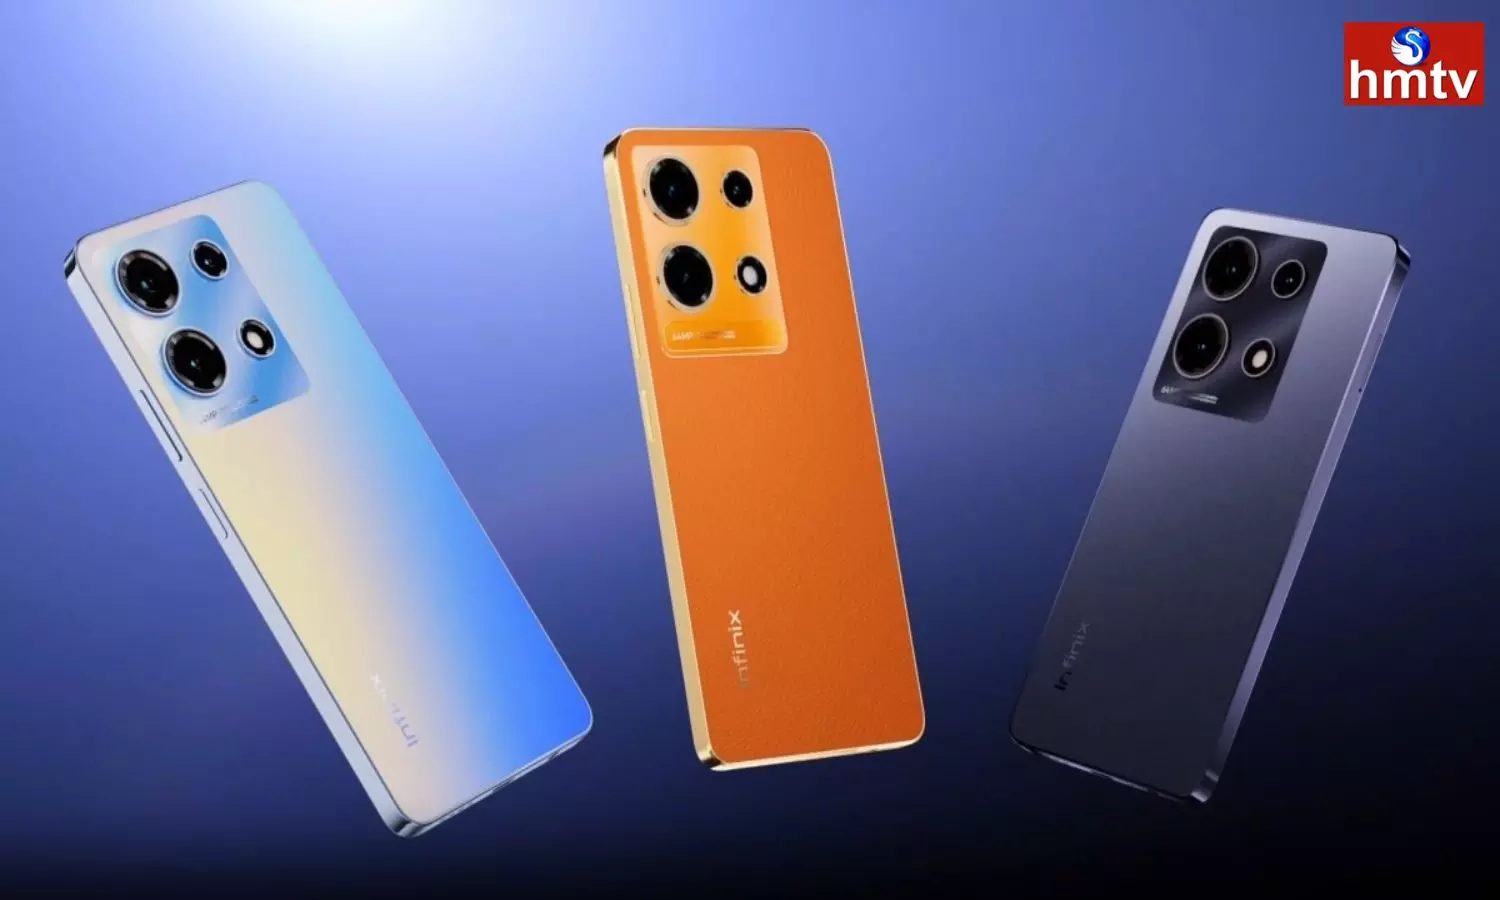 Infinix Launched Note 30 5g in India With Jbl Speakers and 108mp Camera Under rs 15k Price Check Features and Specifications